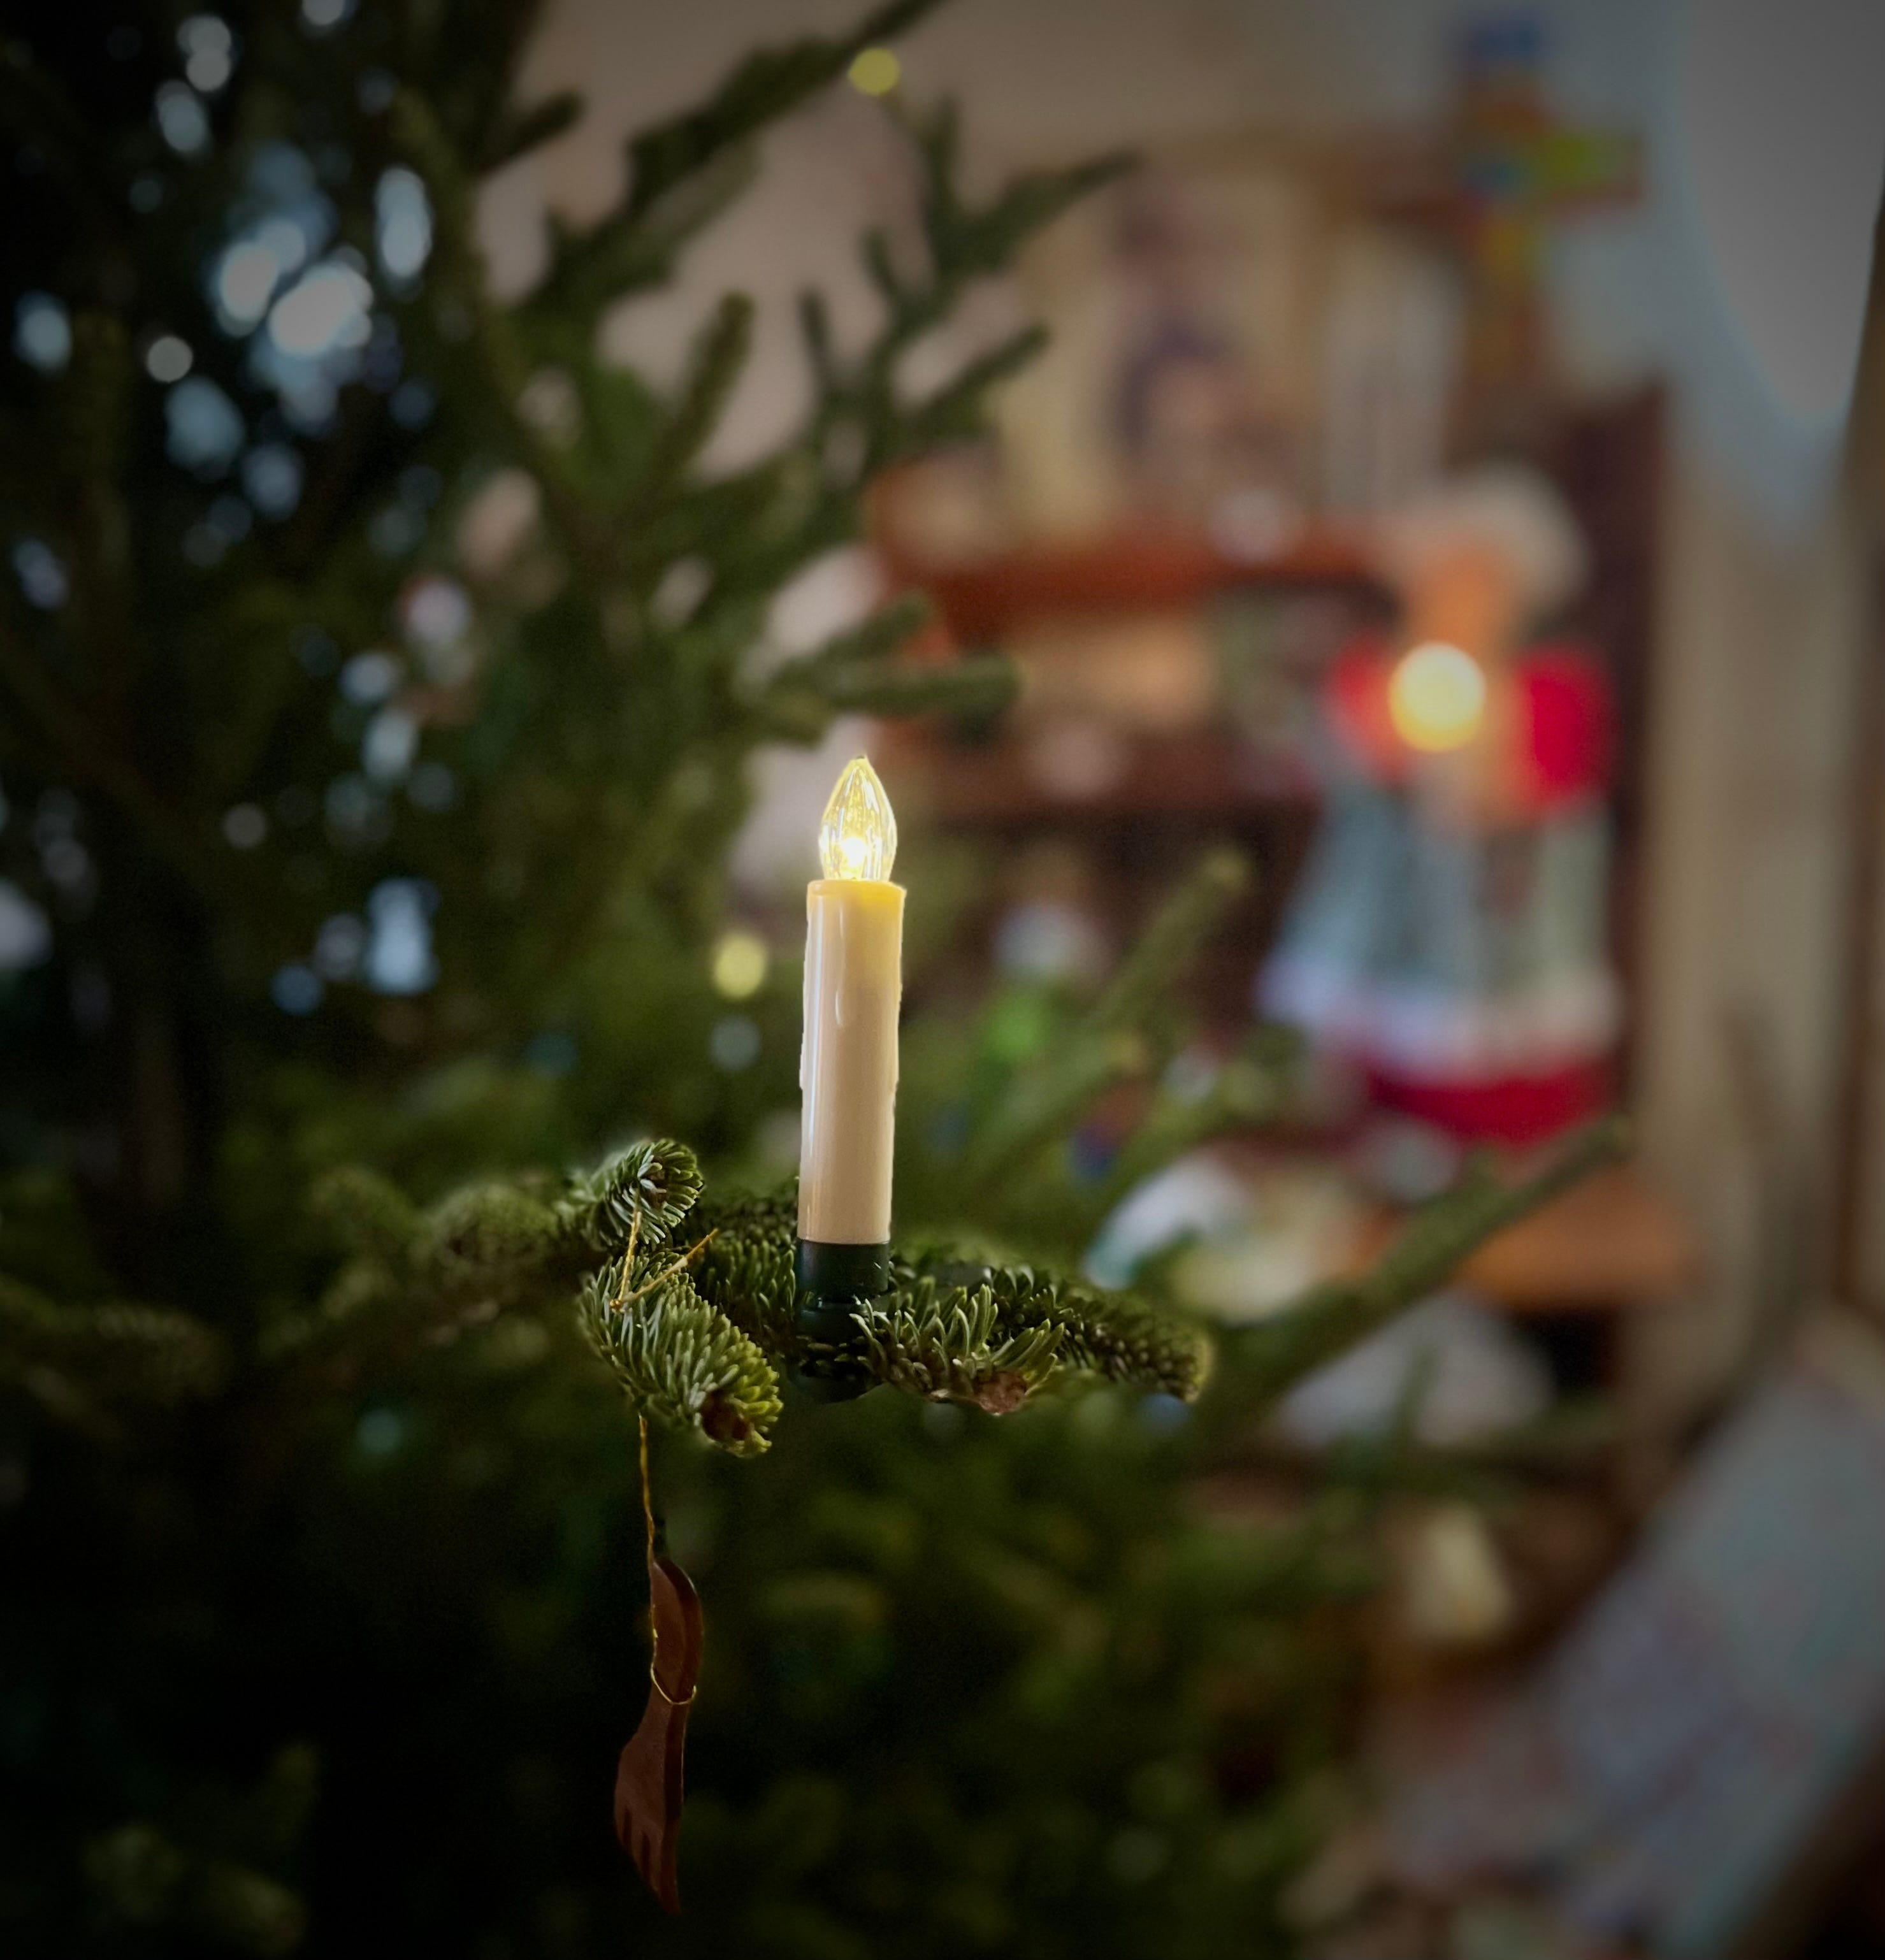 The first day of Christmas: Calling us in